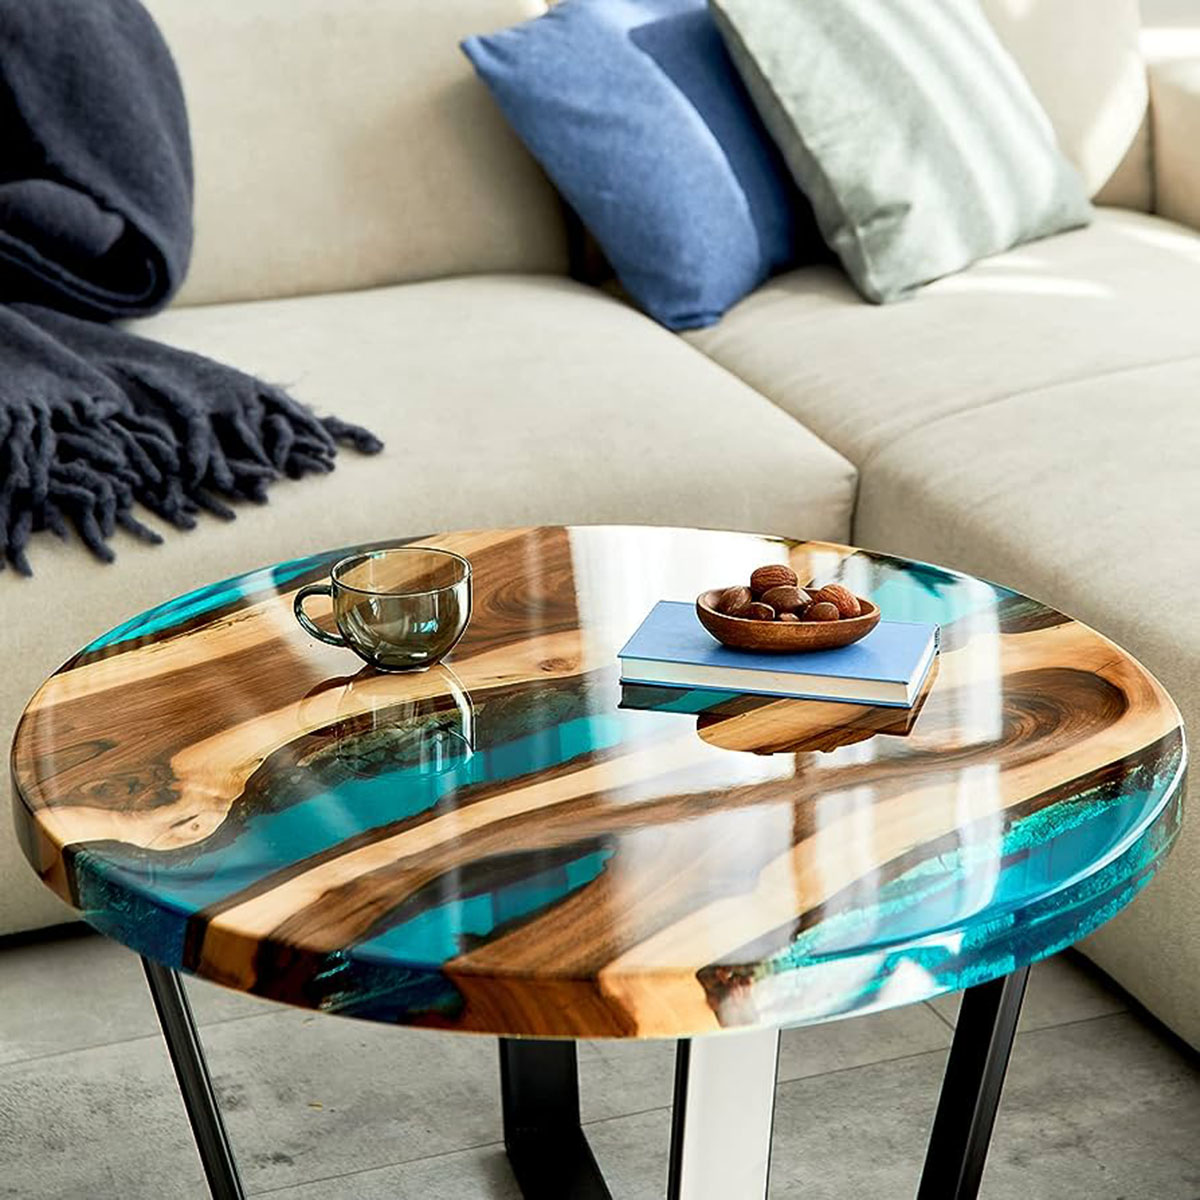 How To Make A Resin Coffee Table